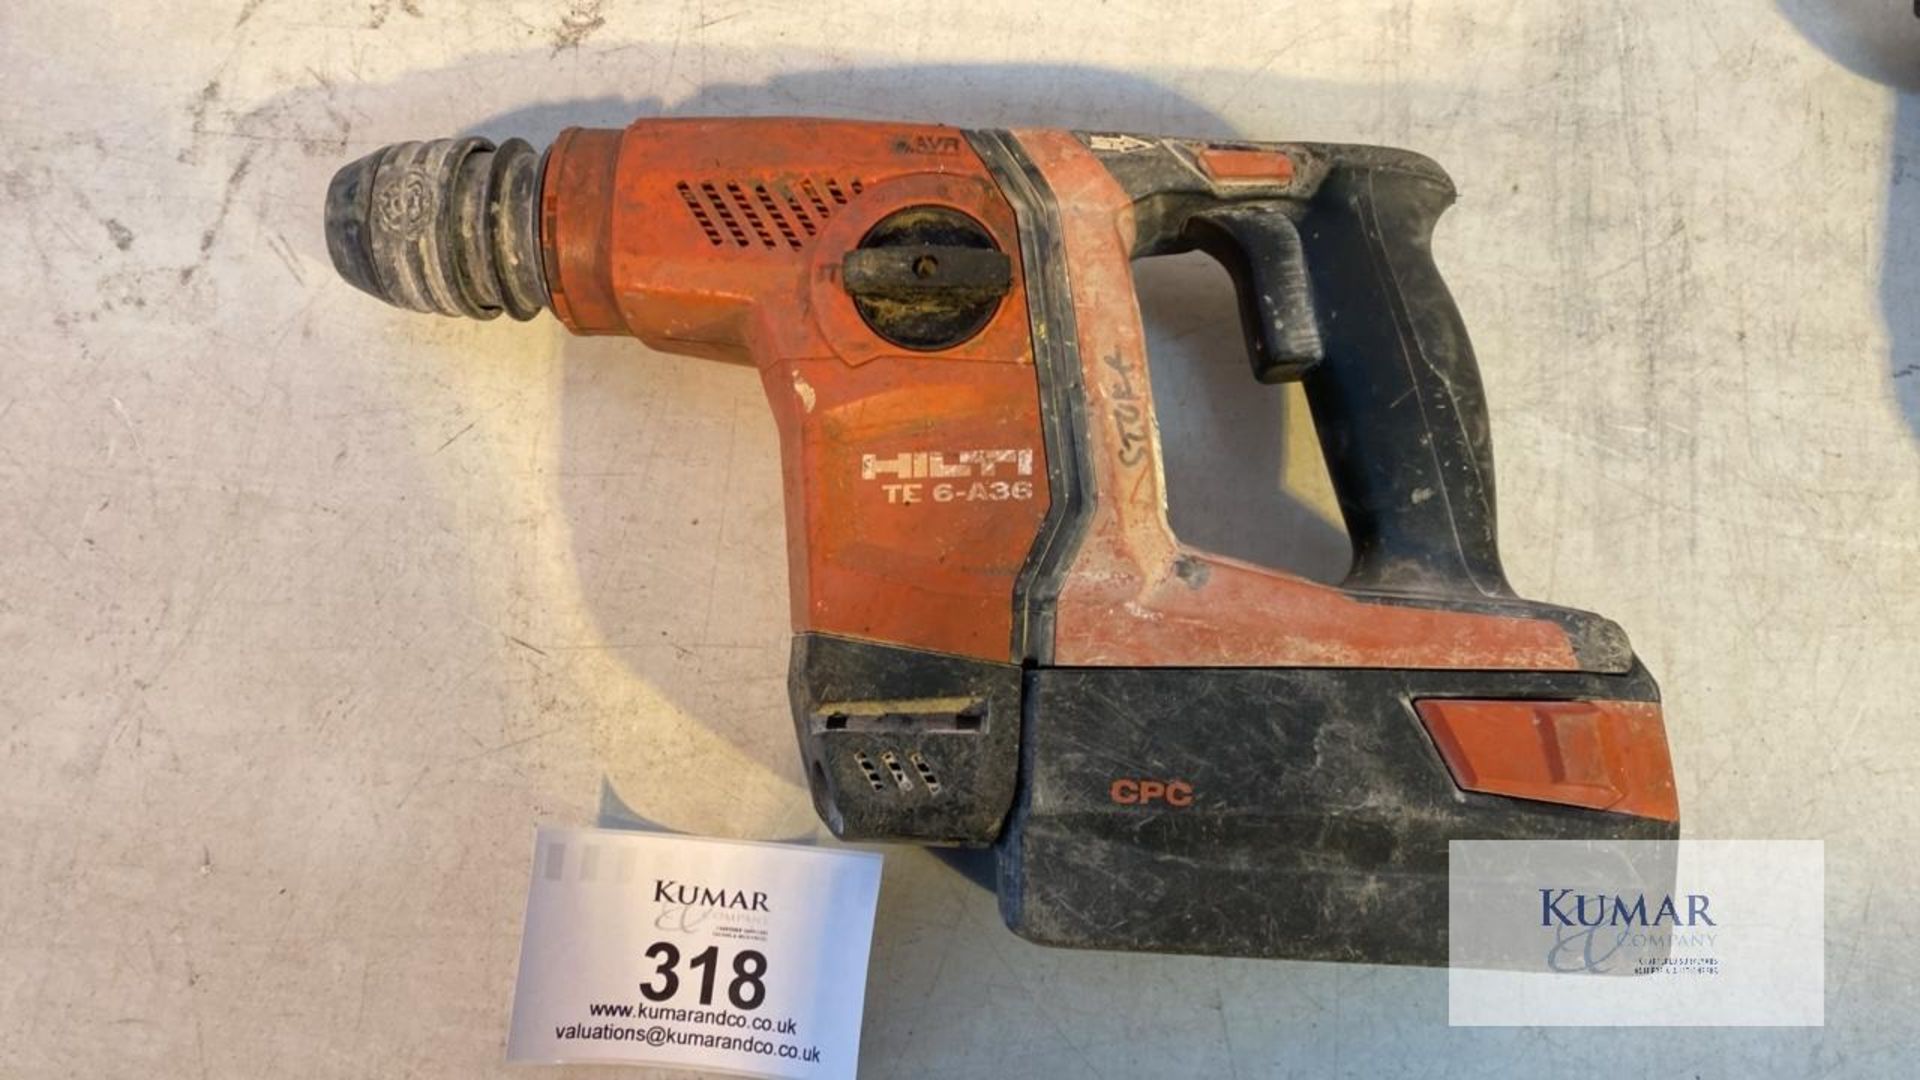 Hilti TE 6-A36 36V SDS Cordless Hammer Drill with Battery, Serial No. 900700195 (2019) No Charger - Image 4 of 4